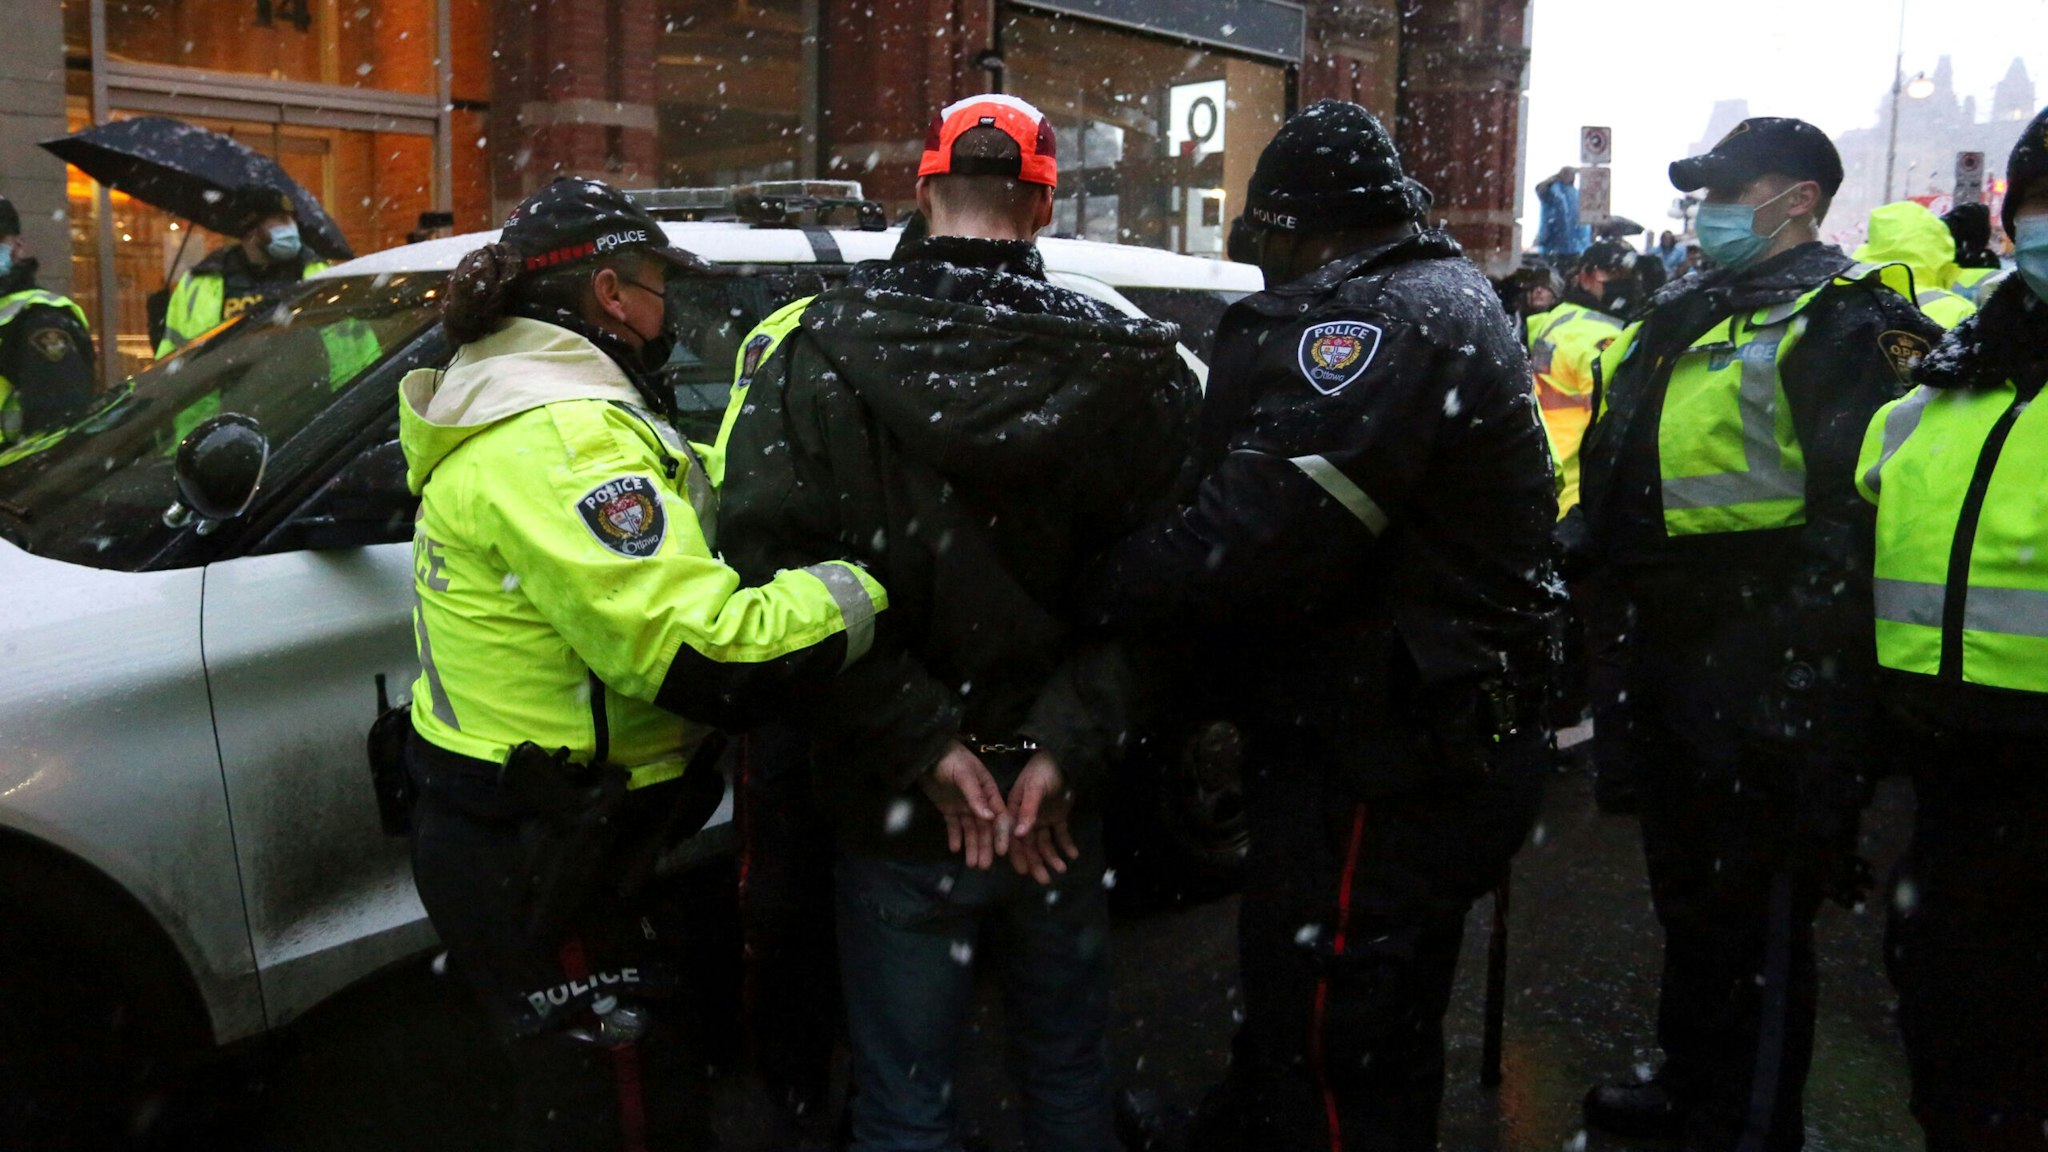 TOPSHOT - Police officers escort an arrested protester to a police car during a protest over pandemic health rules and the Trudeau government in Ottawa, Canada on February 17, 2022. - Canadian police massed in the capital February 17, 2022, readying to clear a trucker-led protest that has choked Ottawa's streets for three weeks and provoked the government to call on rarely used emergency powers.